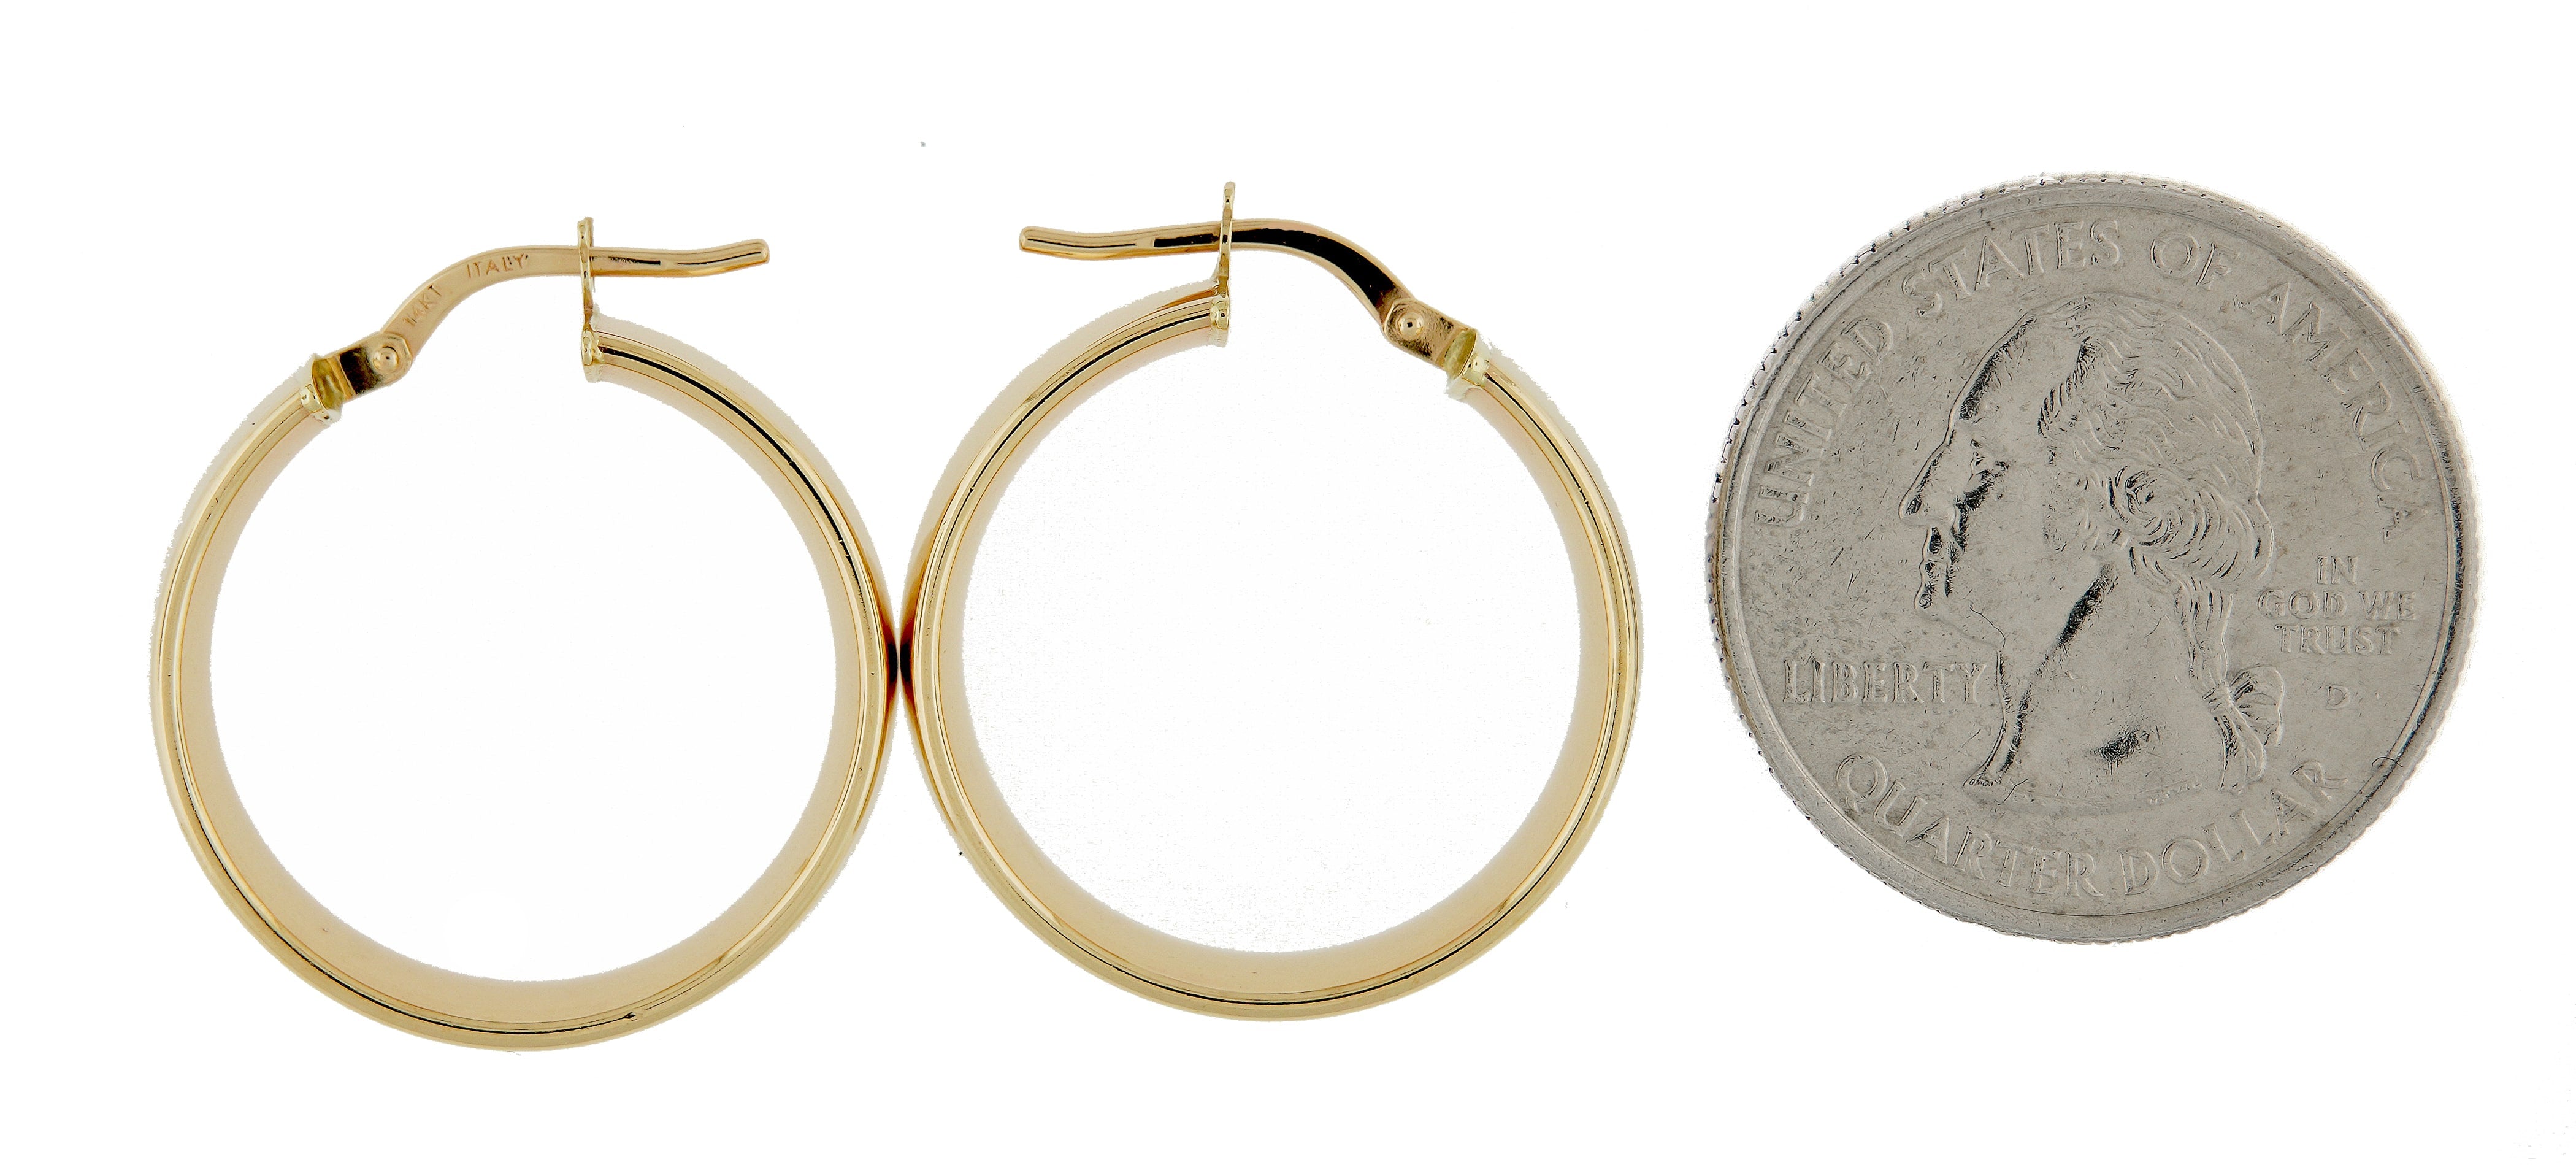 14k Yellow Gold Round Square Tube Hoop Earrings 23mm x 7mm